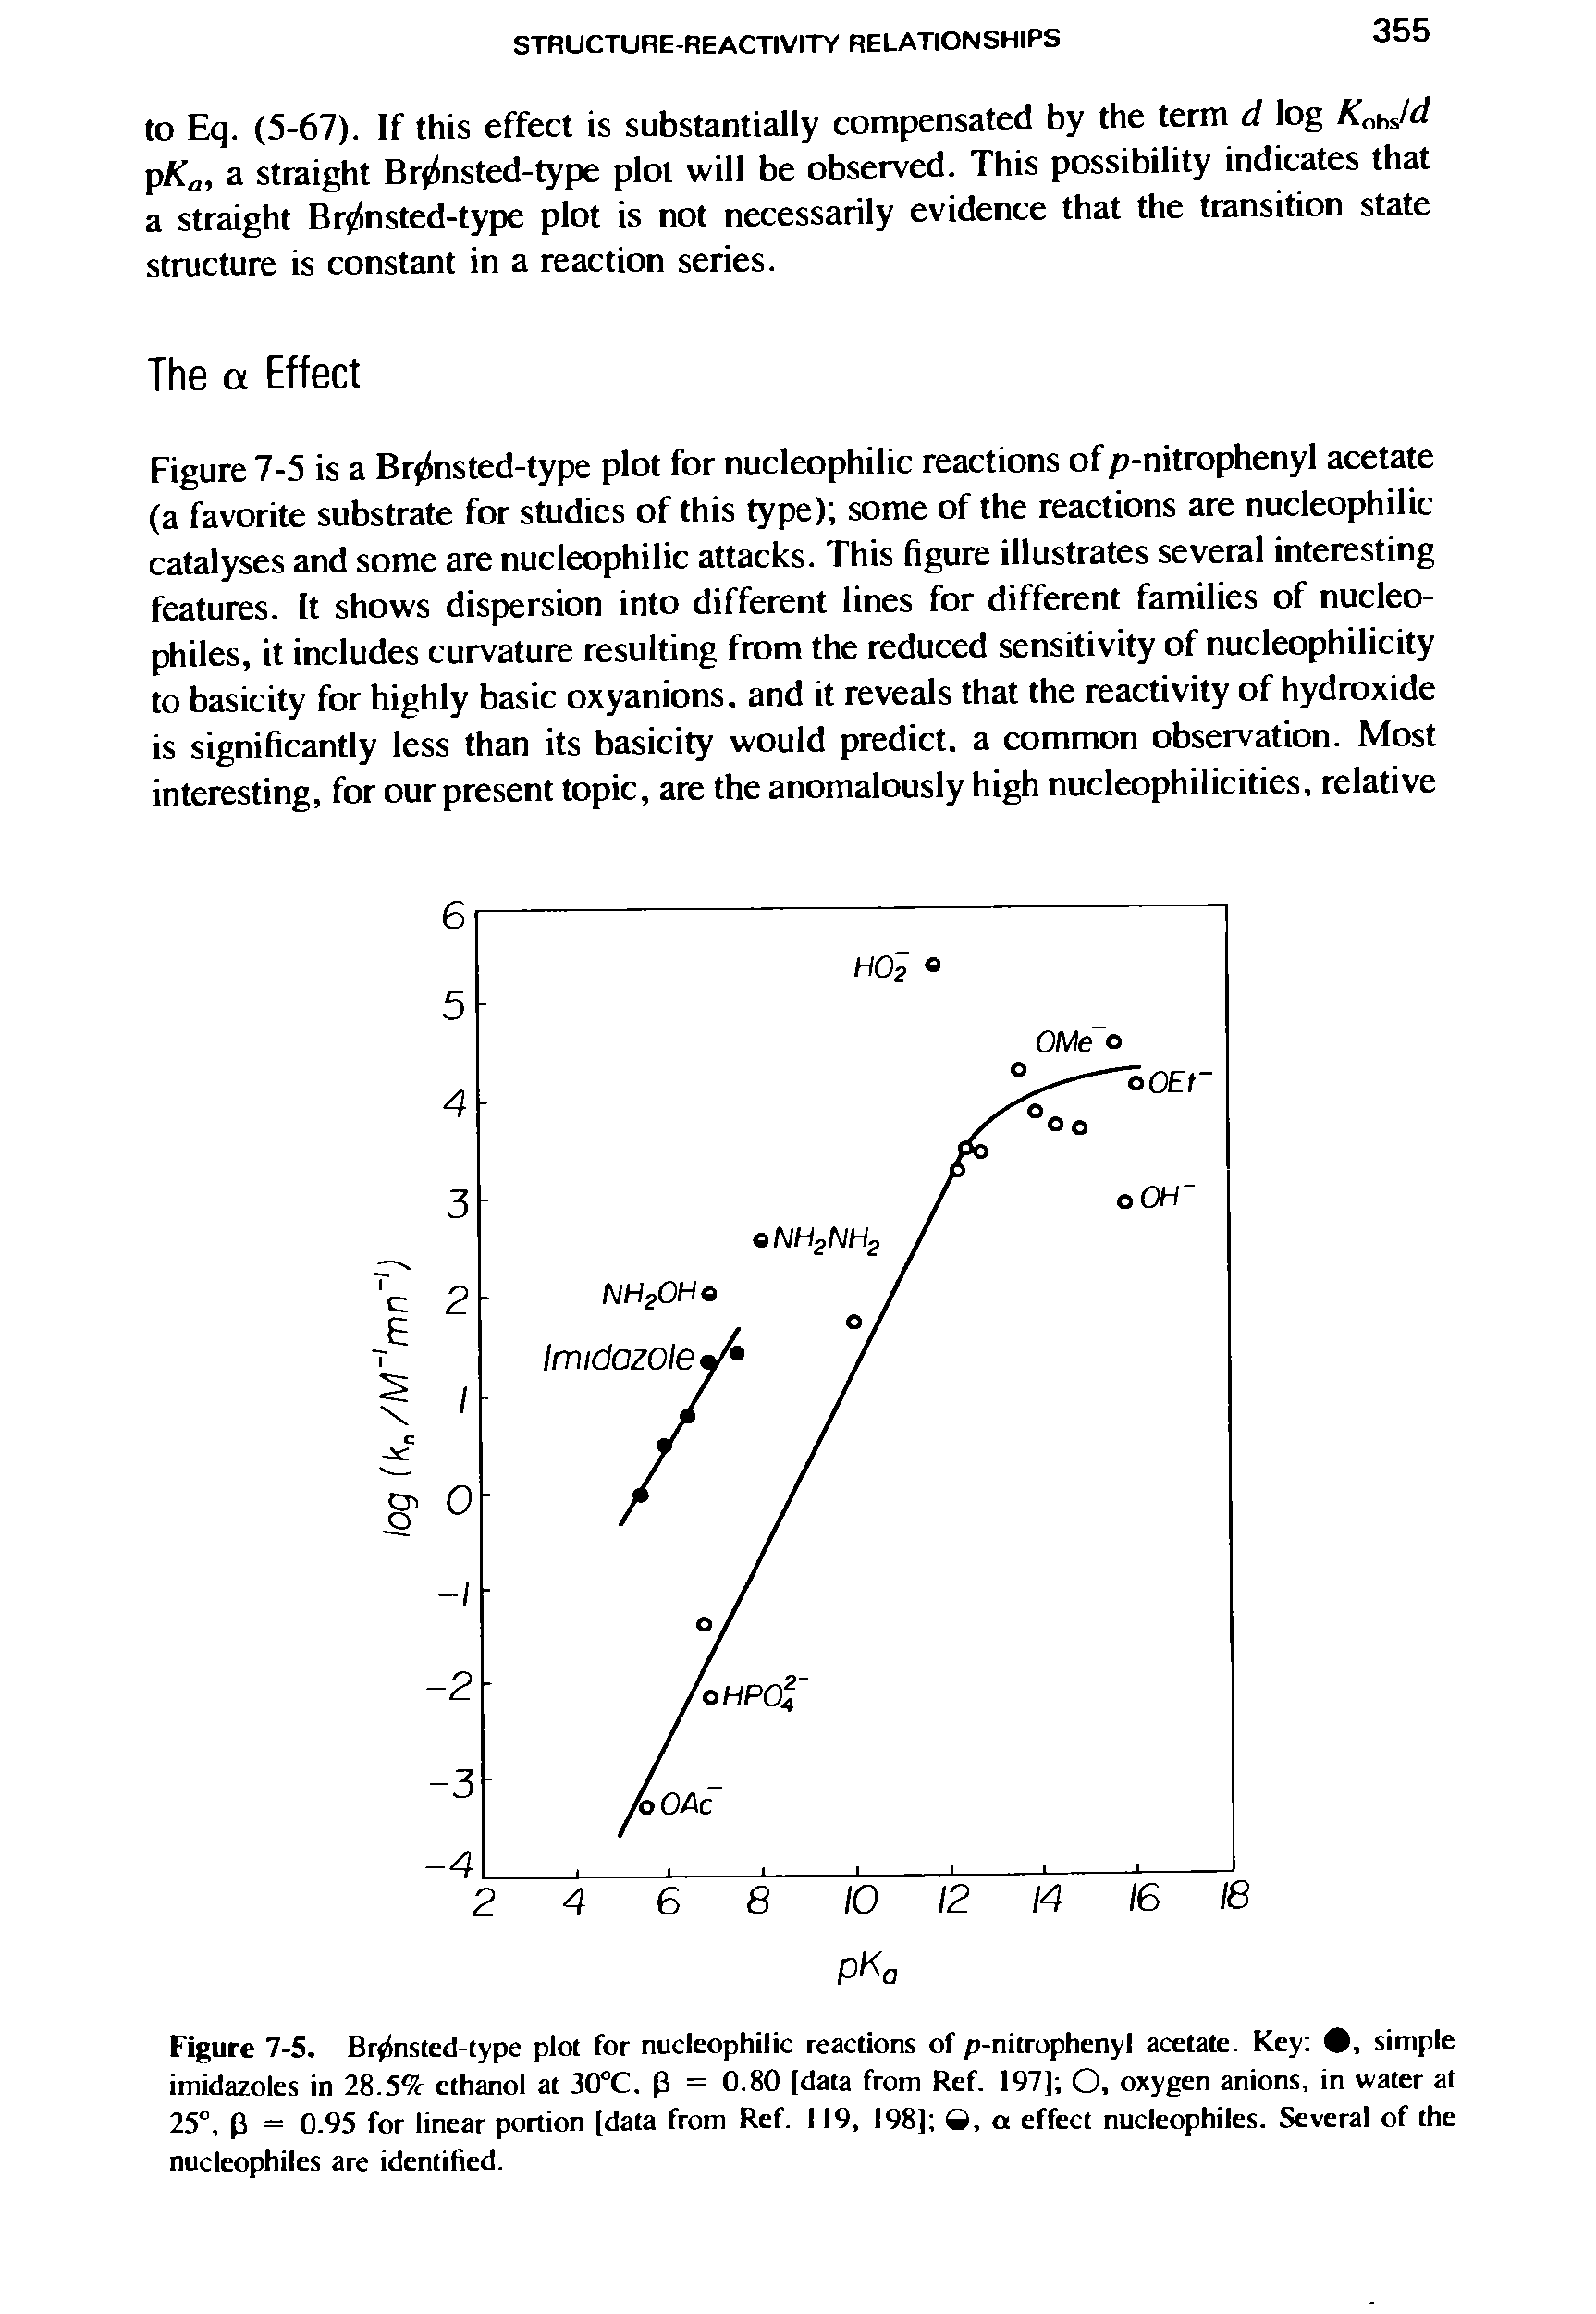 Figure 7-5. Bry4nsted-type plot for nucleophilic reactions of p-nitrophenyl acetate. Key , simple imidazoles in 28.5 ethanol at JO°C. p = 0.80 (data from Ref. 197] O, oxygen anions, in water at 25°, P = 0.95 for linear portion [data from Ref. 119, 198] O, a effect nucleophiles. Several of the nucleophiles are identified.